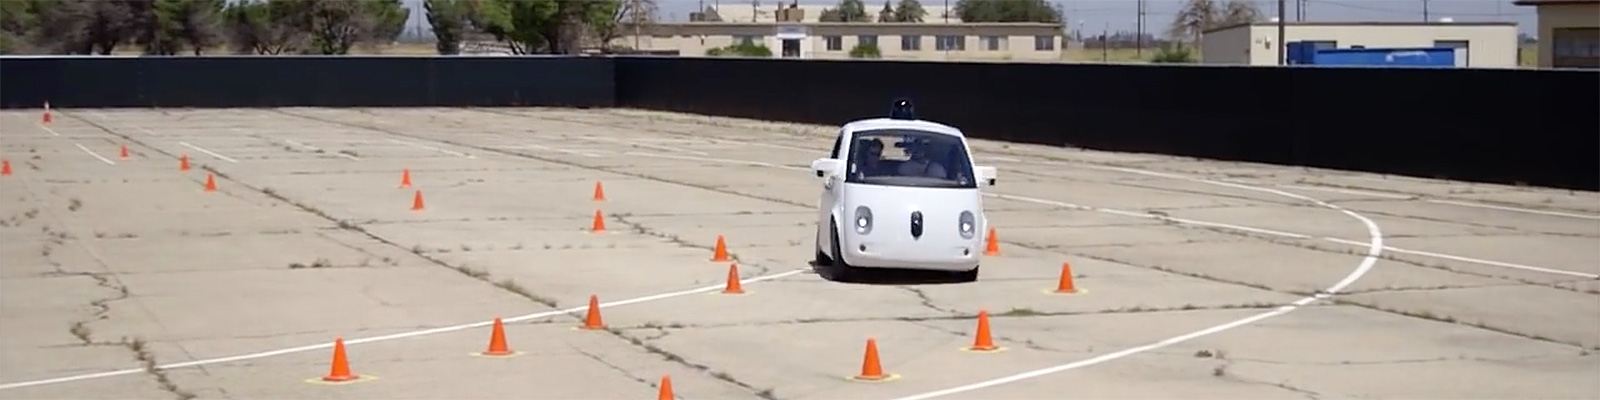 Ready for the Road（Google Self-Driving Car Project）